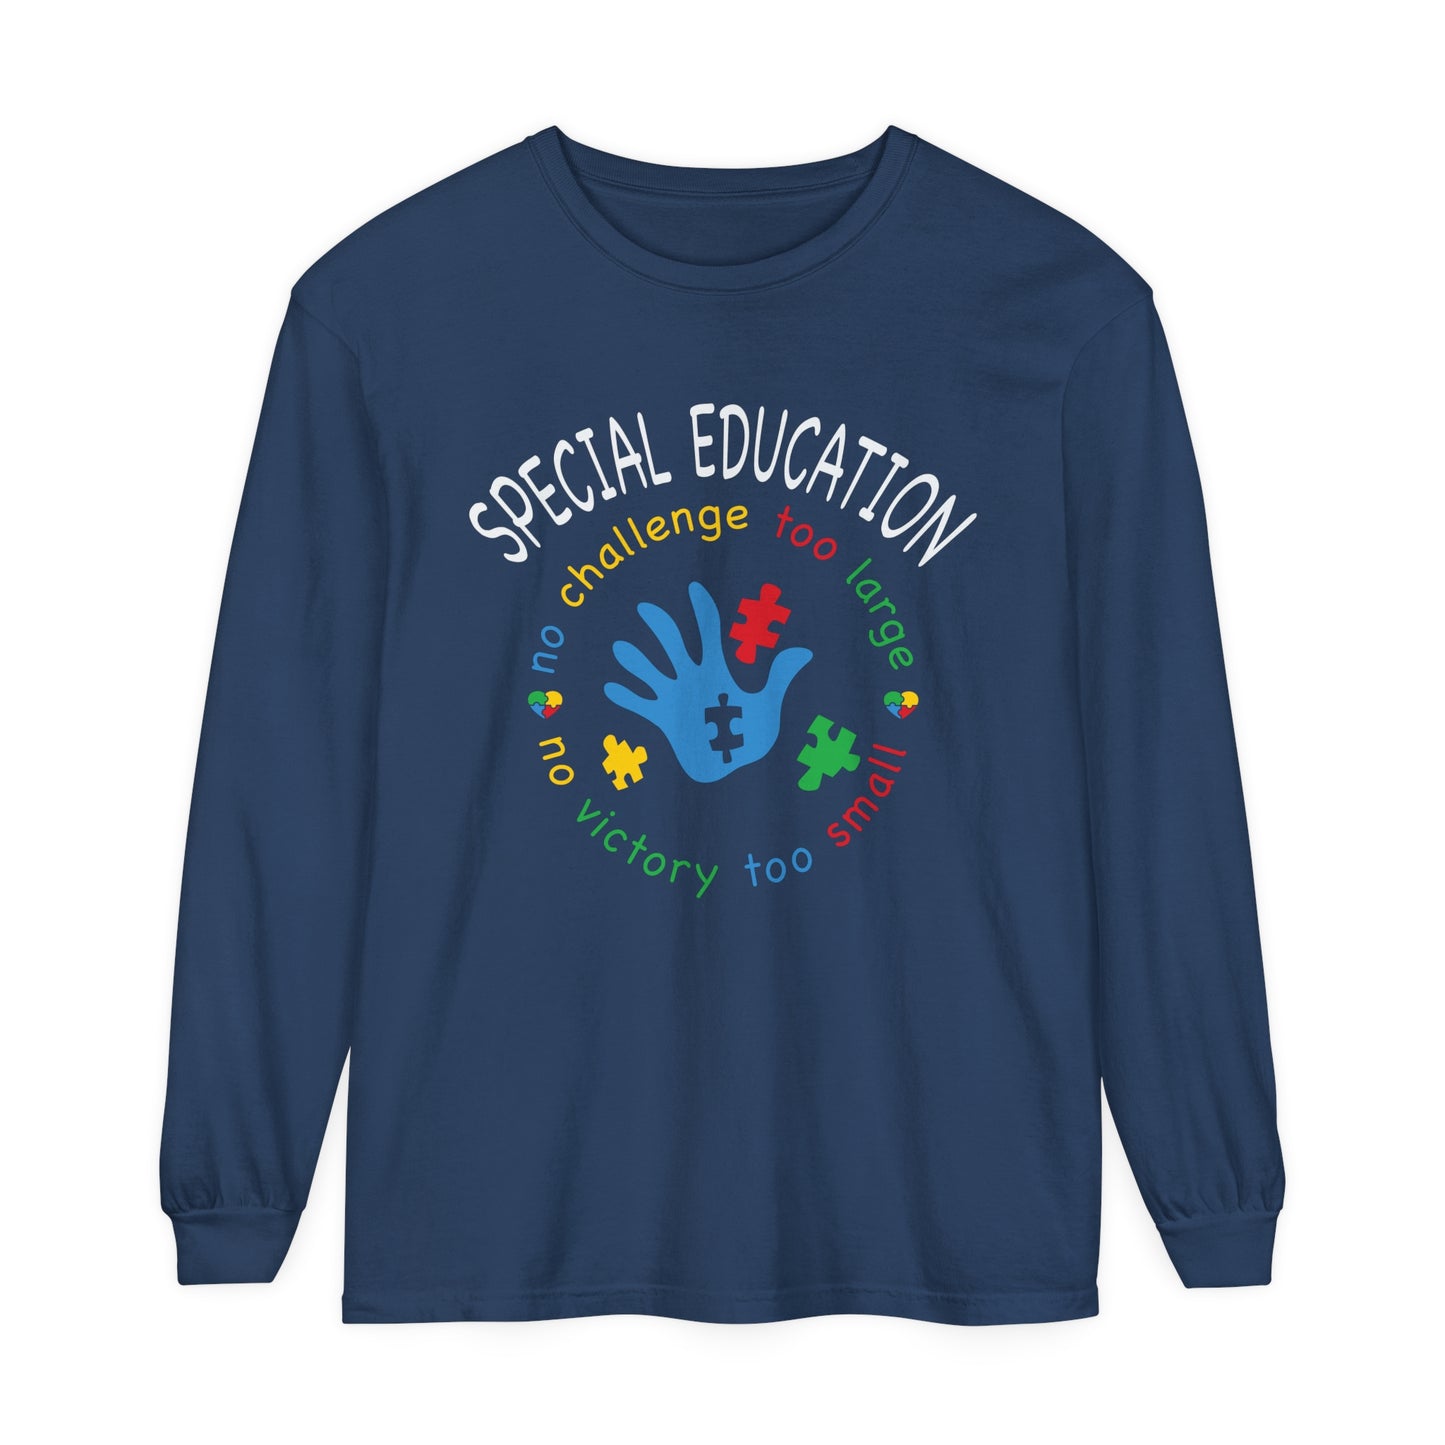 Special Education No challenge too big Women's Long Sleeve T-Shirt